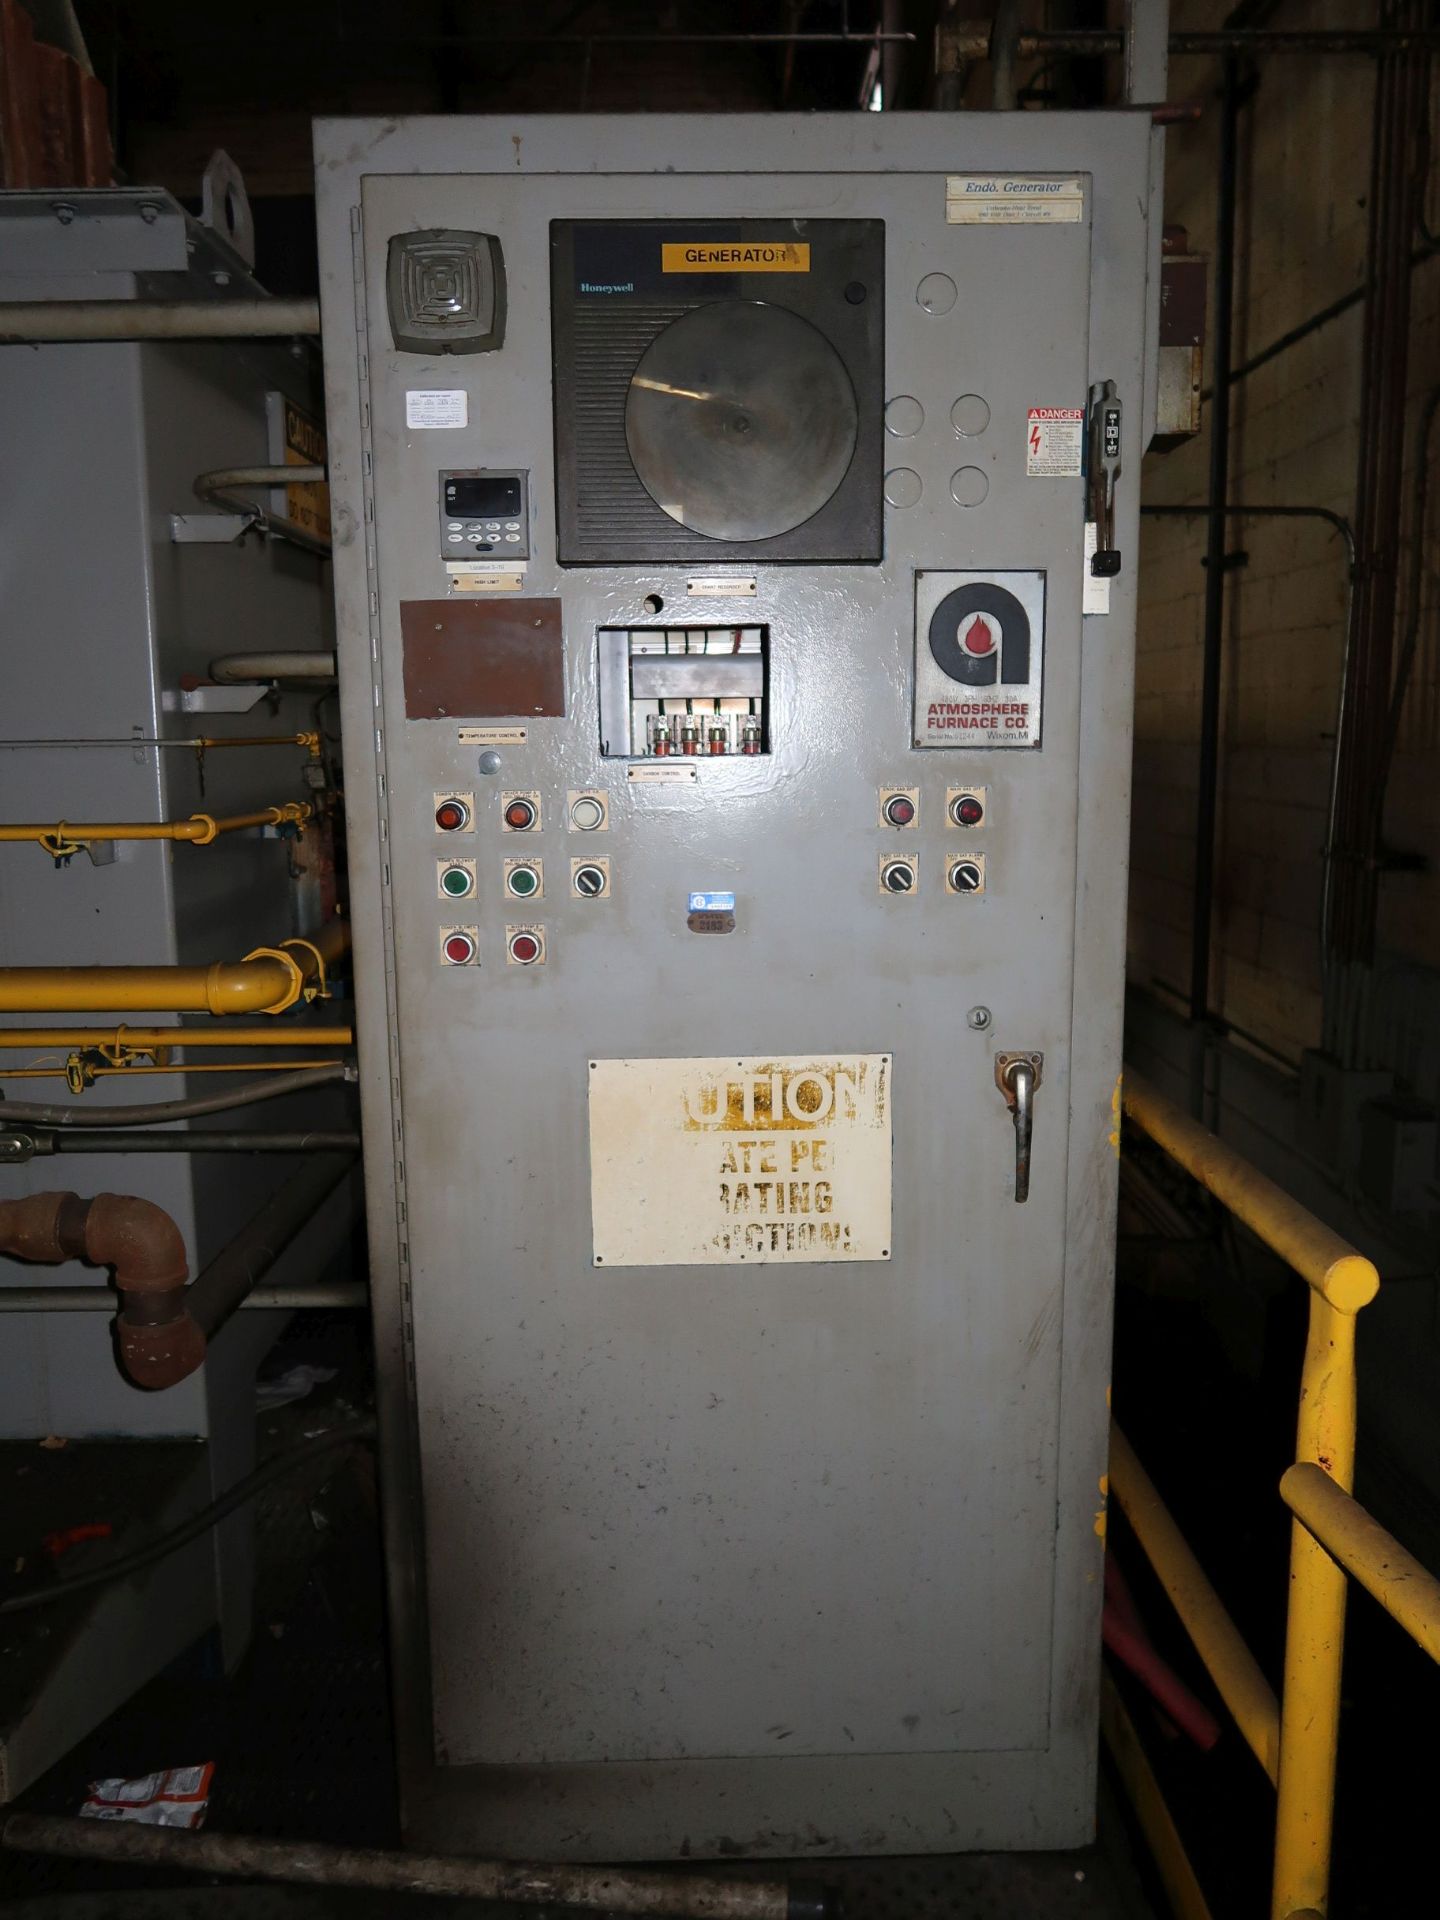 ATMOSPHERE FURNACE CO. ENDOTHERMIC GAS GENERATOR; S/N 51244 - FORMERLY LOT 658, USED WITH FURNACE - Image 4 of 4